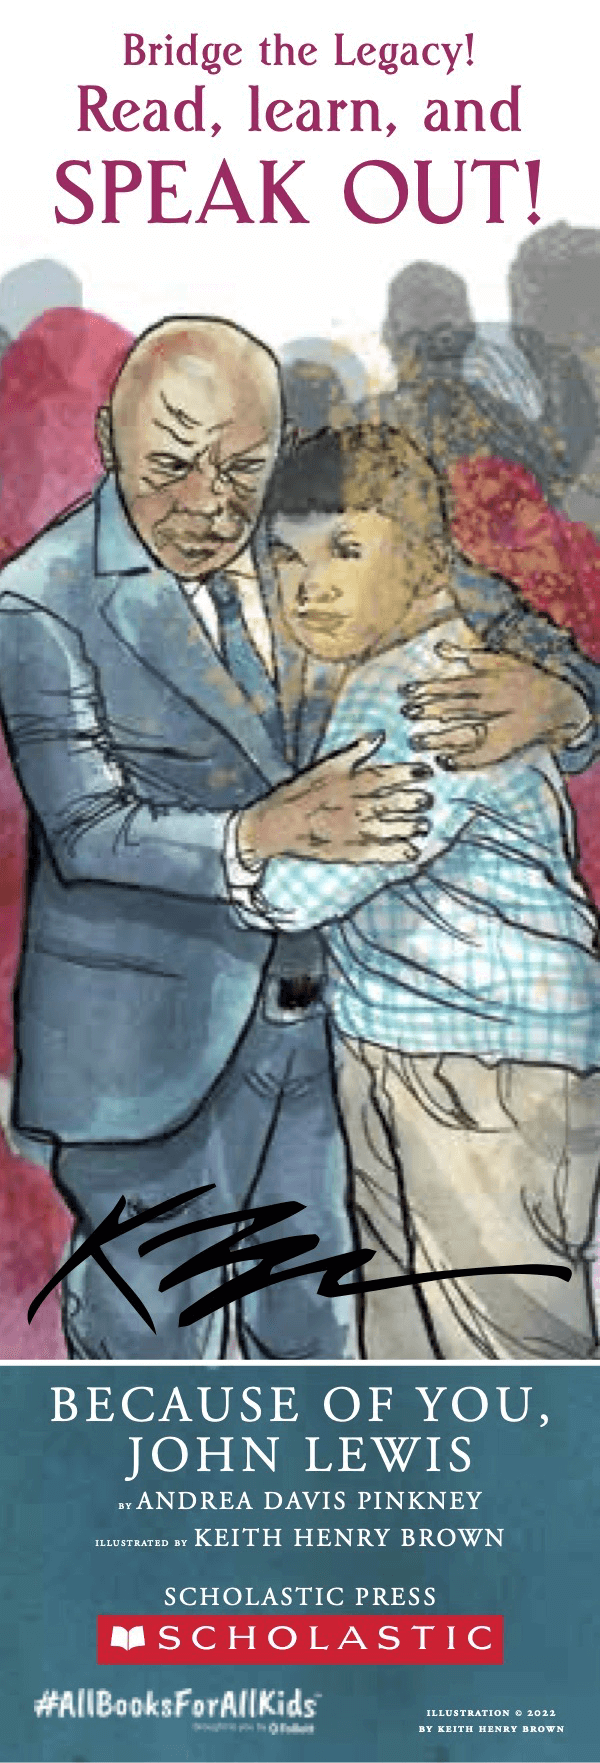 Bridge the Leggacy! Read, learn, and SPEAK OUT!| Because of You, John Lewis | by Andrea Davis Pinkney | Illustrated by Keith Henry Brown | Scholastic Press Bookmark Image